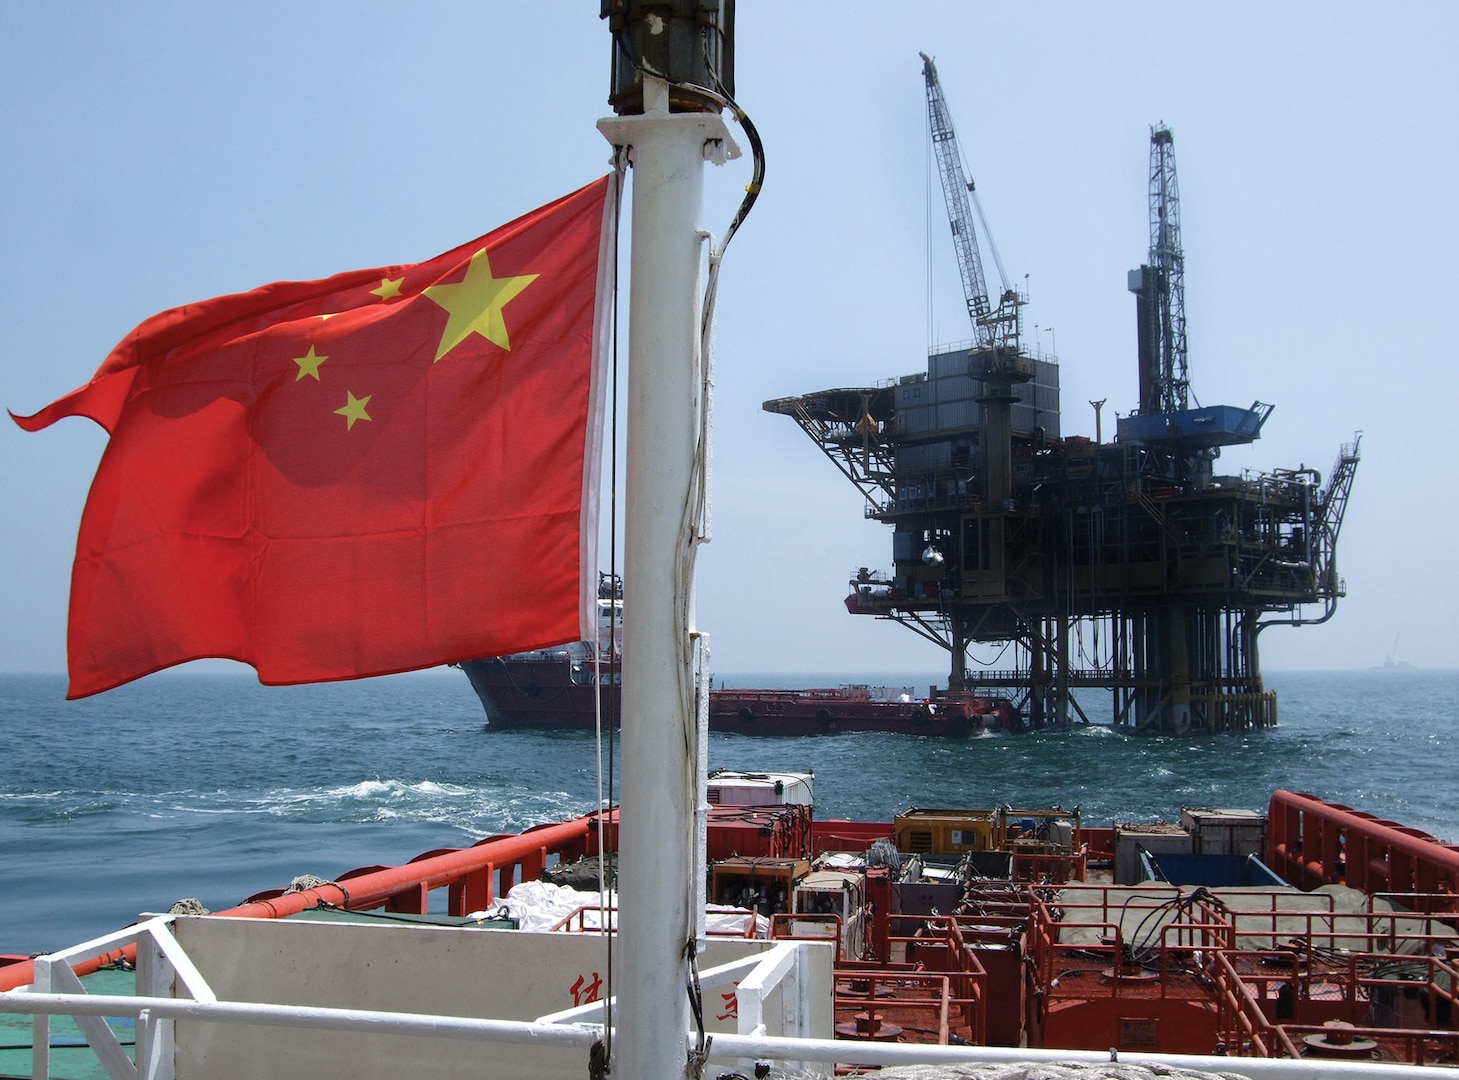 China has provoked its neighbors by deep-sea oil drilling in disupted waters. (Rob Ellis)